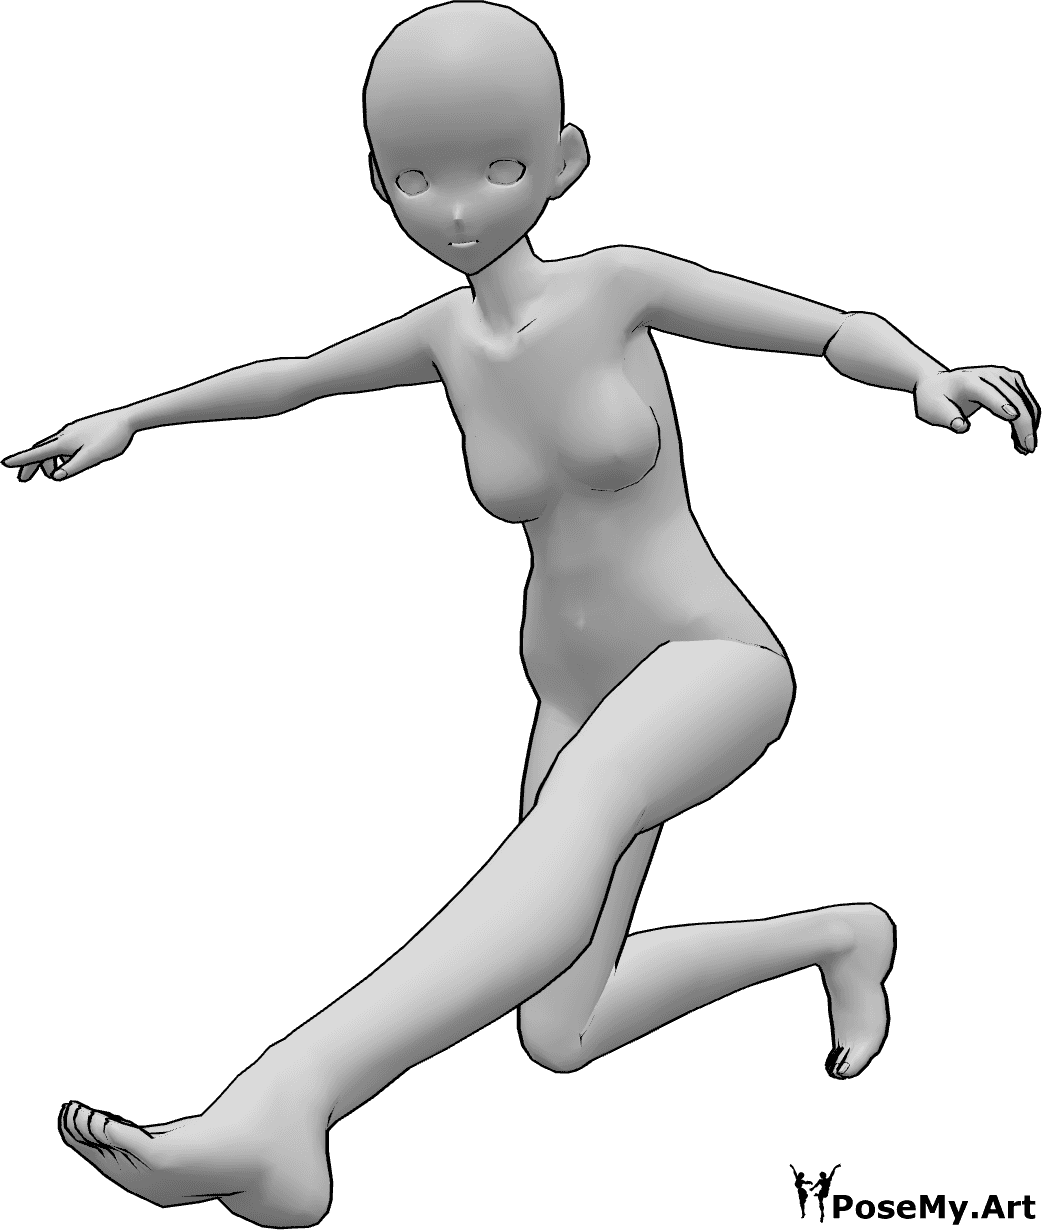 Pose Reference- Anime dynamic landing pose - Anime female is landing, balancing with her hands and looking forward